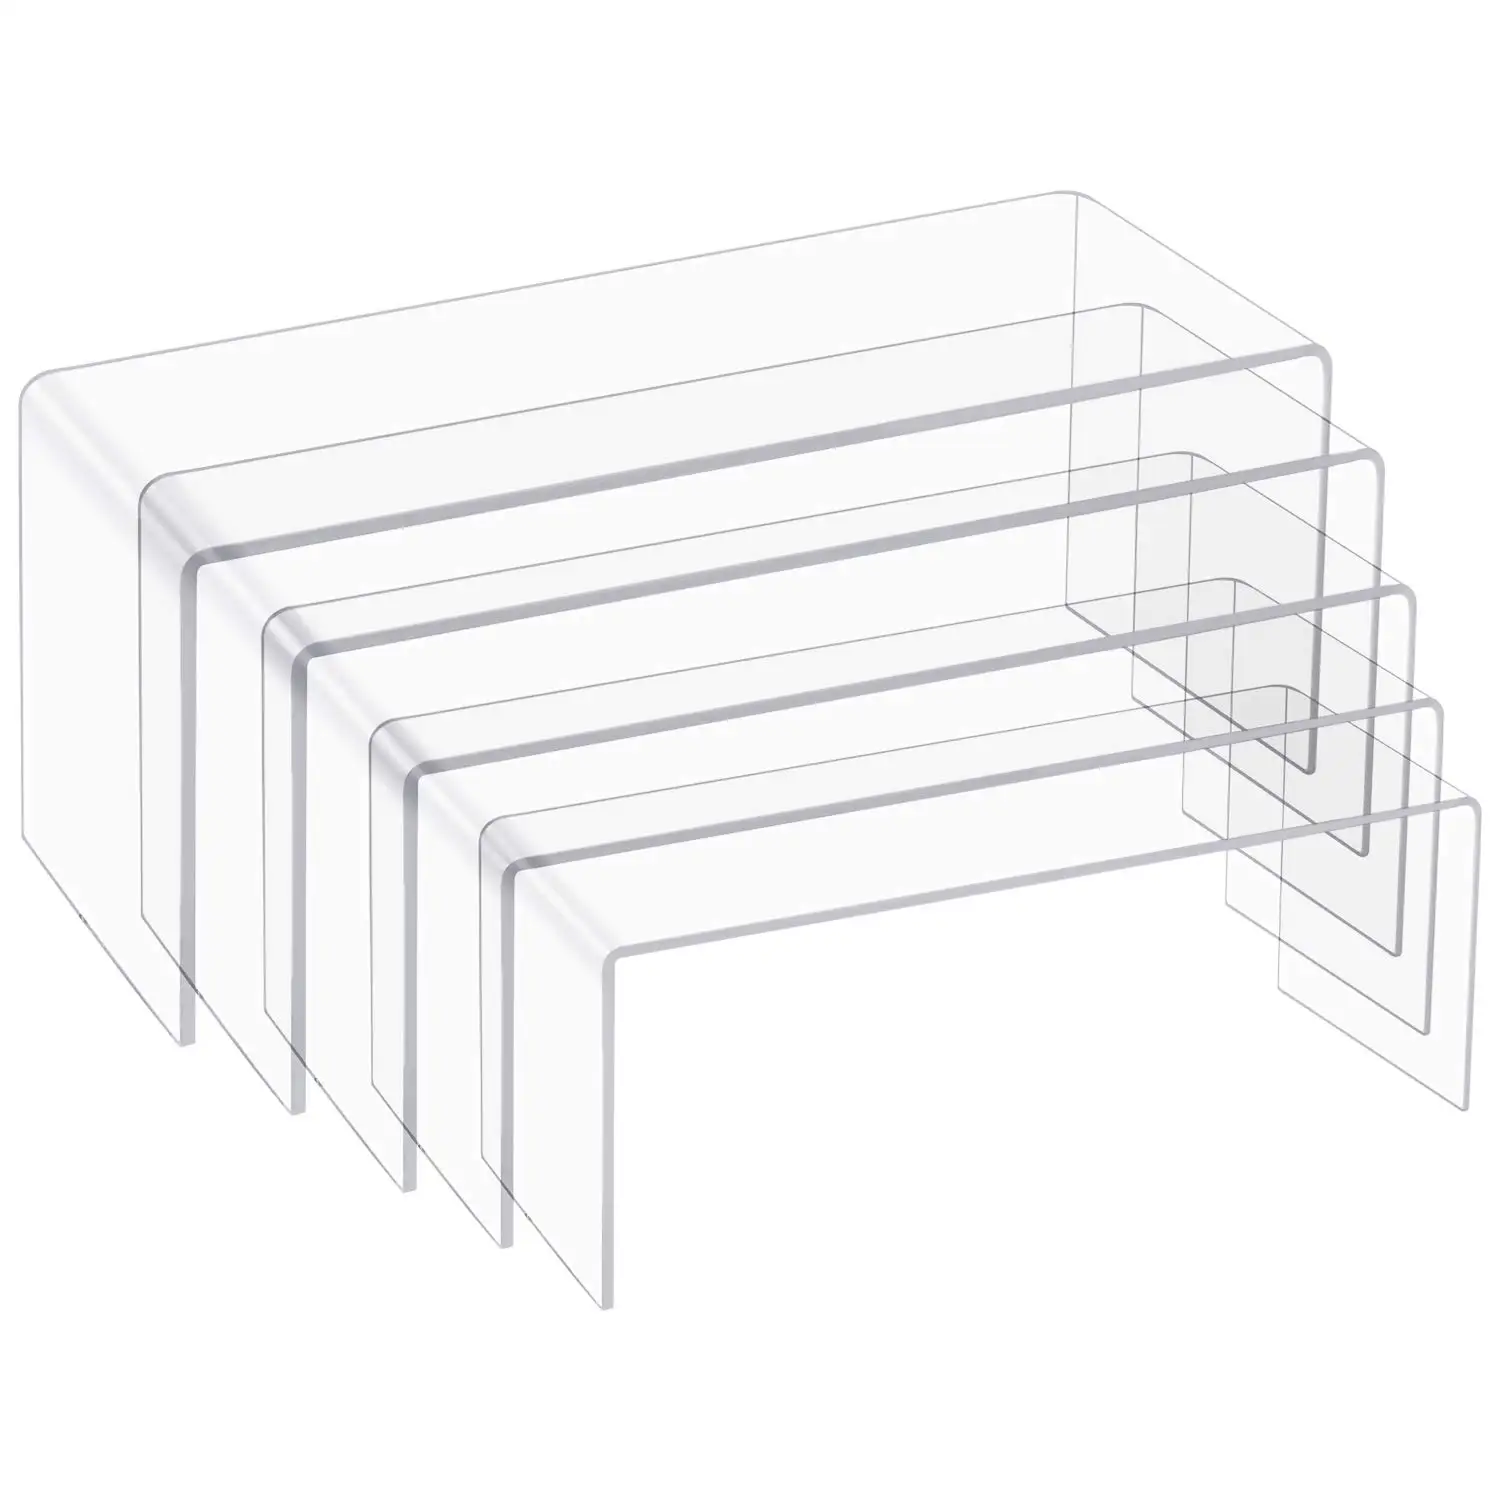 5 Different Sizes Shelf Showcase Fixtures Jewelry Display Riser Candy Display Stand FAZMoss 10 Sets Acrylic Display Stand 